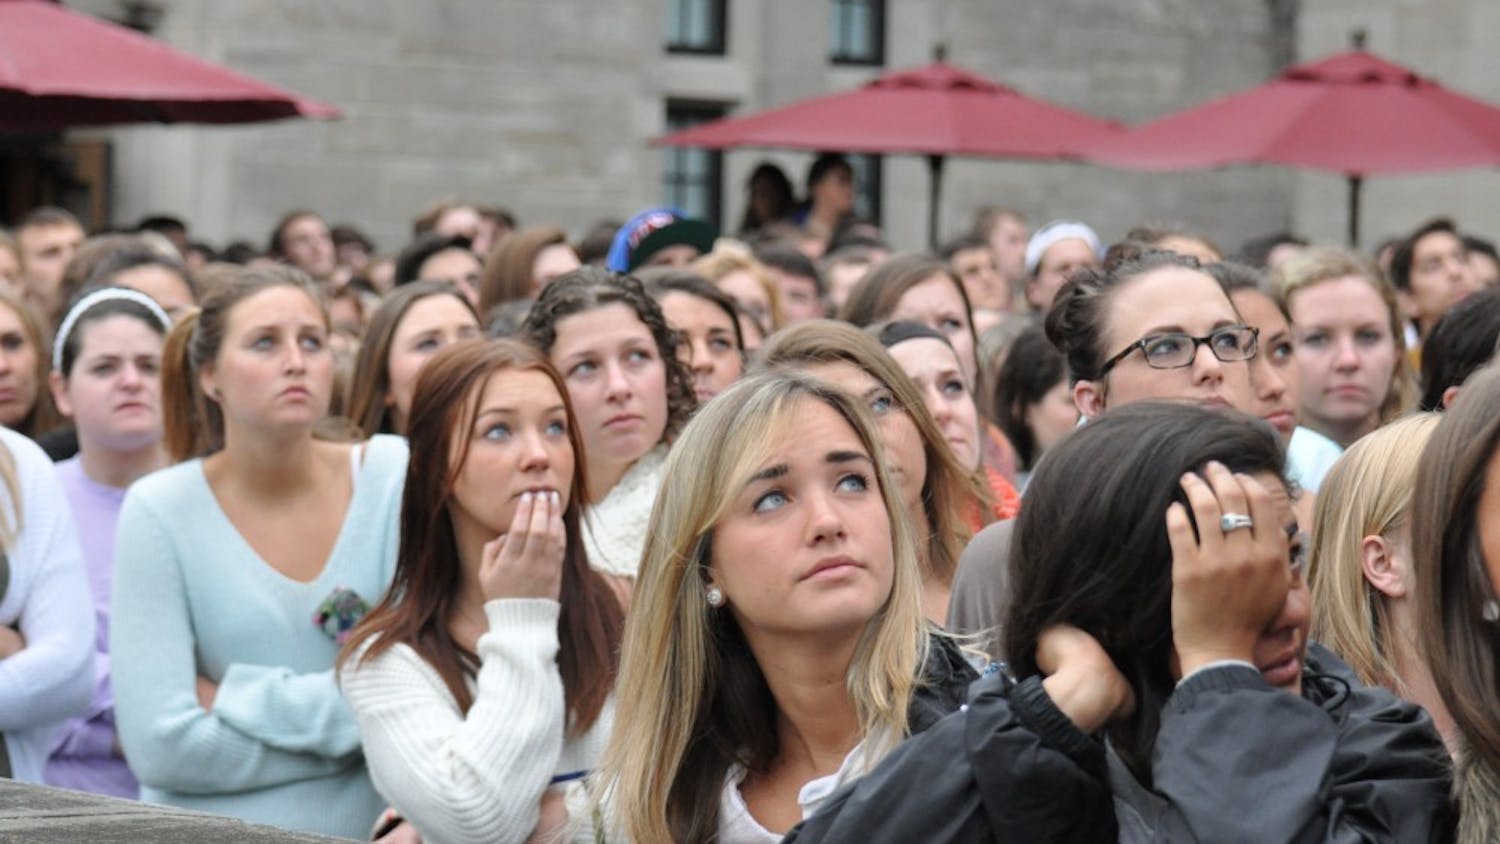 Students watch as balloons are released from the Indiana Memorial Union terrace in memory of Hannah Wilson. The crowd of people who turned out for the vigil was more than Alumni Hall could hold, and crowds of supporters gathered on the terrace and other areas in and around the union.